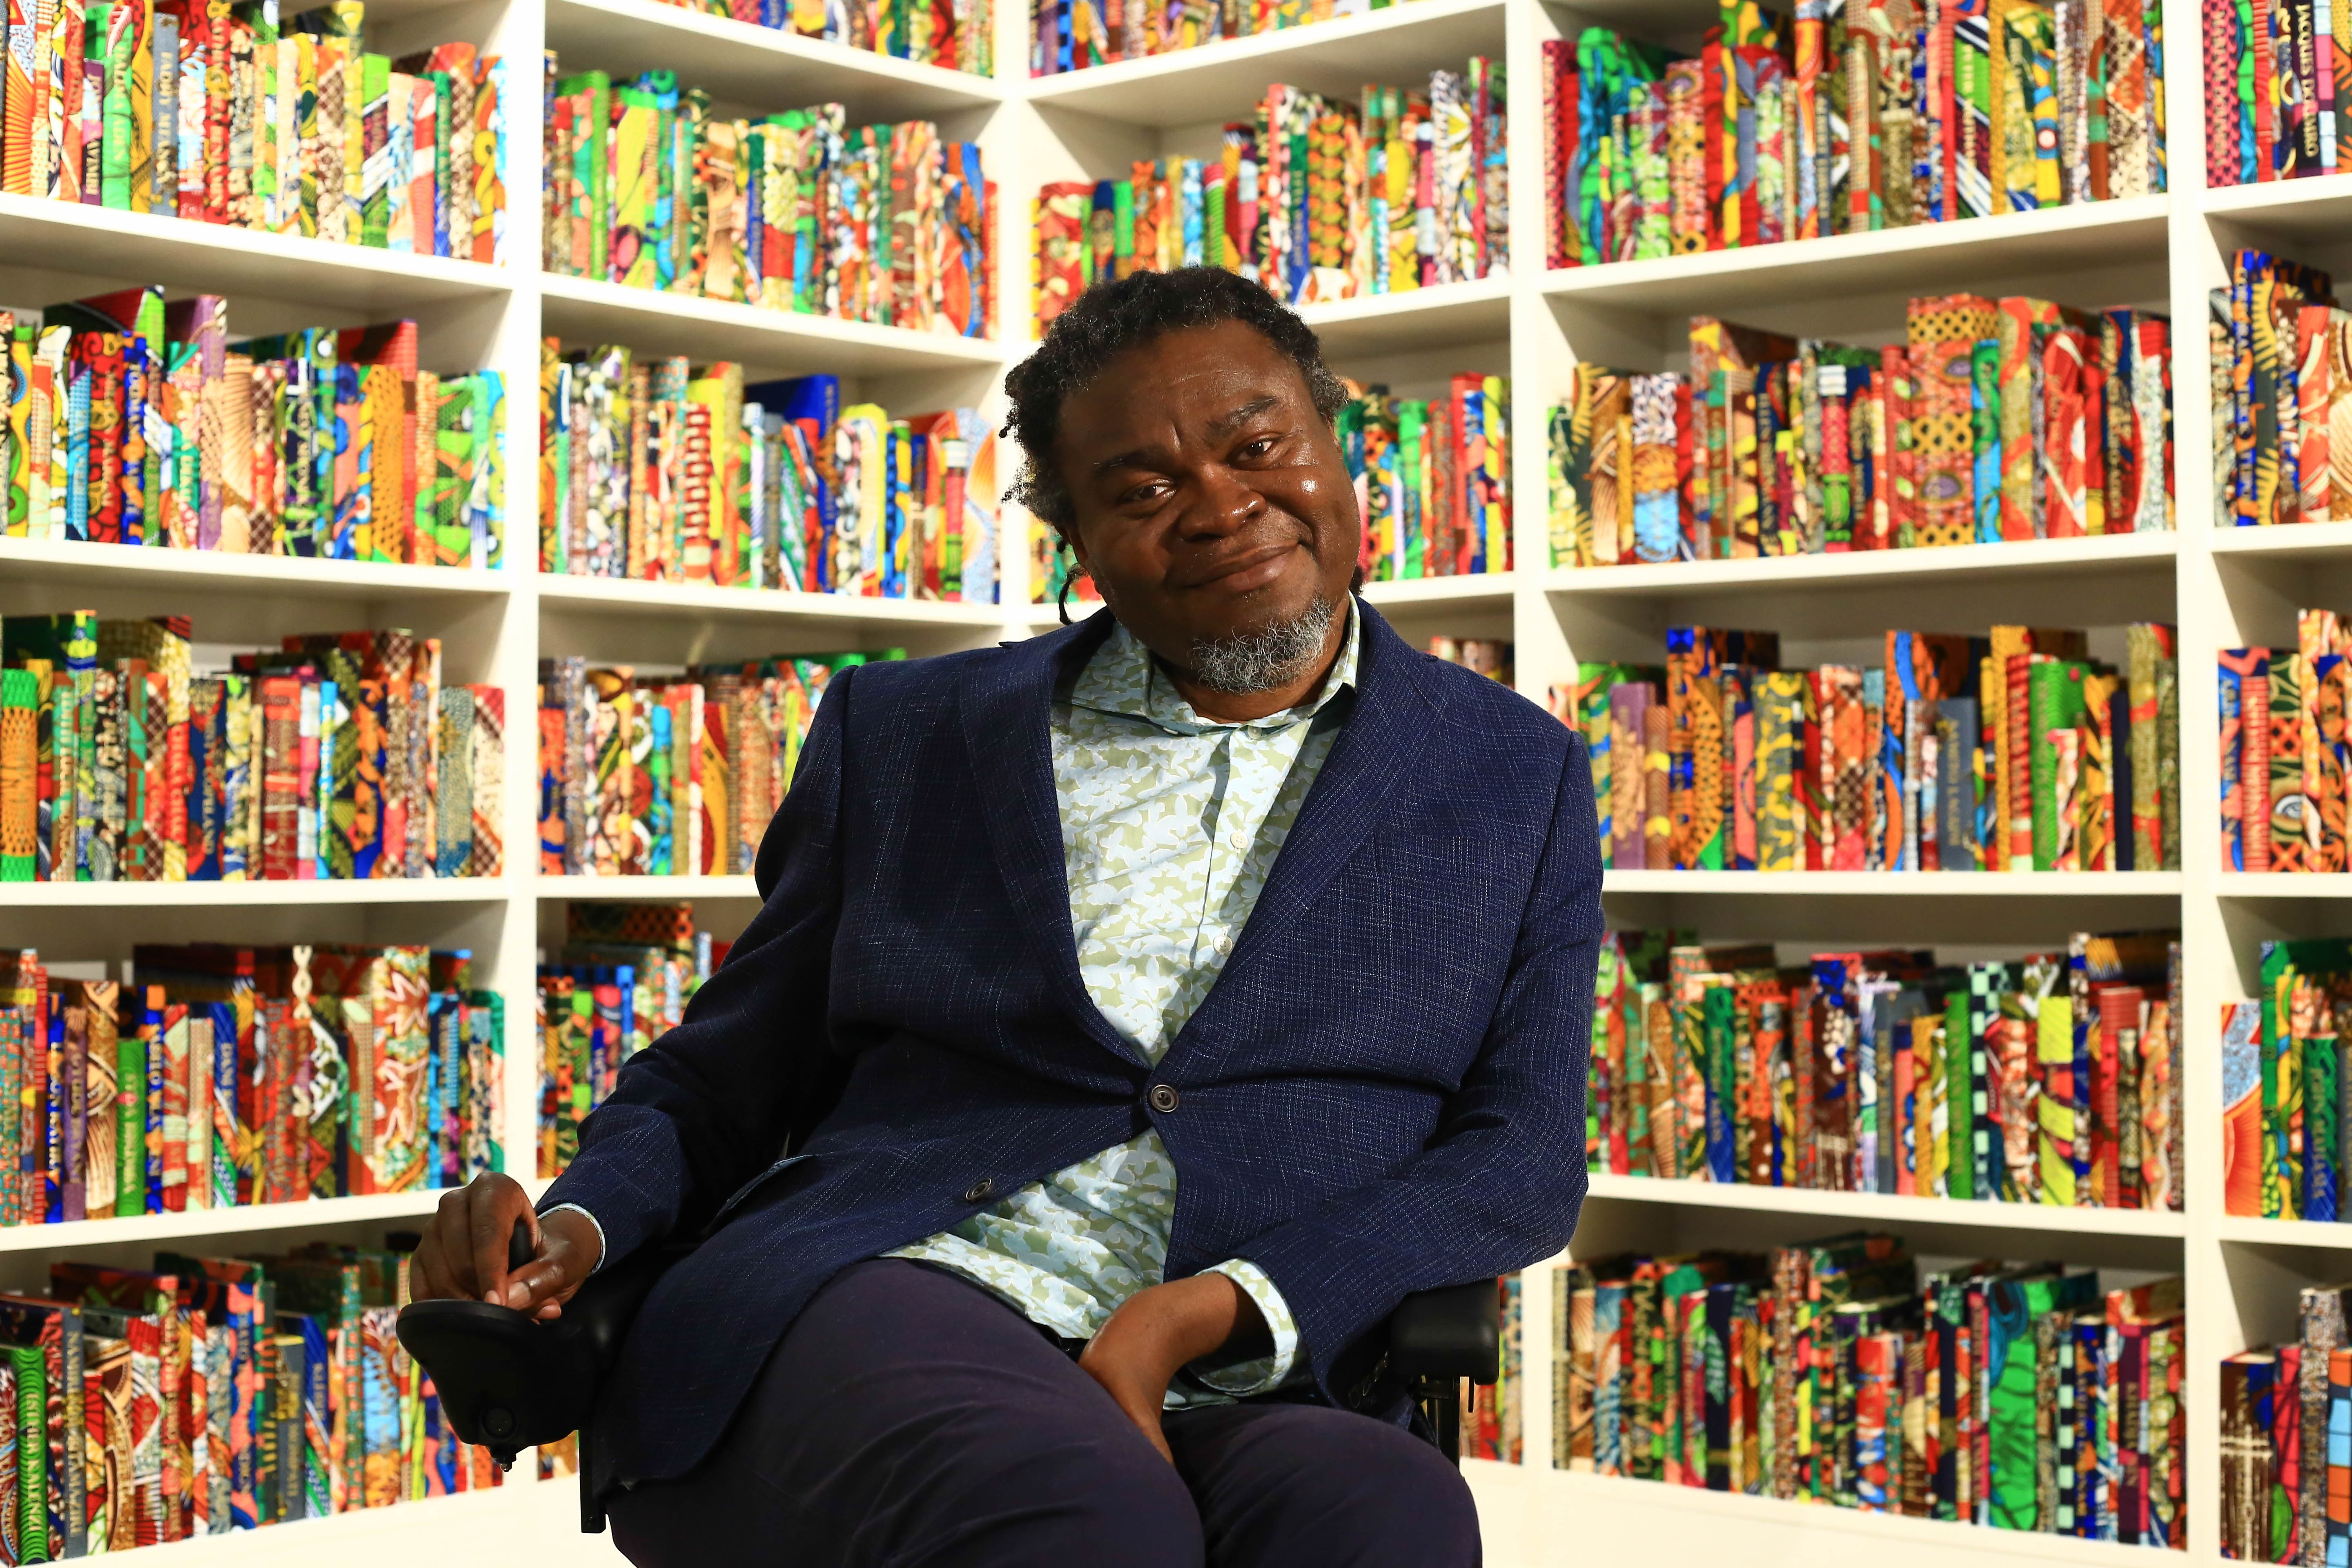 Celebrated British-Nigerian artist Yinka Shonibare at the Goodman Gallery during the opening of his solo exhibition 'Ruins Decorated' on September 01, 2018 in Johannesburg, South Africa. Shonibare, also known as Picasso in reverse, delights art lovers with his playful and inventive creations. (Photo by Gallo Images / Sunday Times / Simphiwe Nkwali)